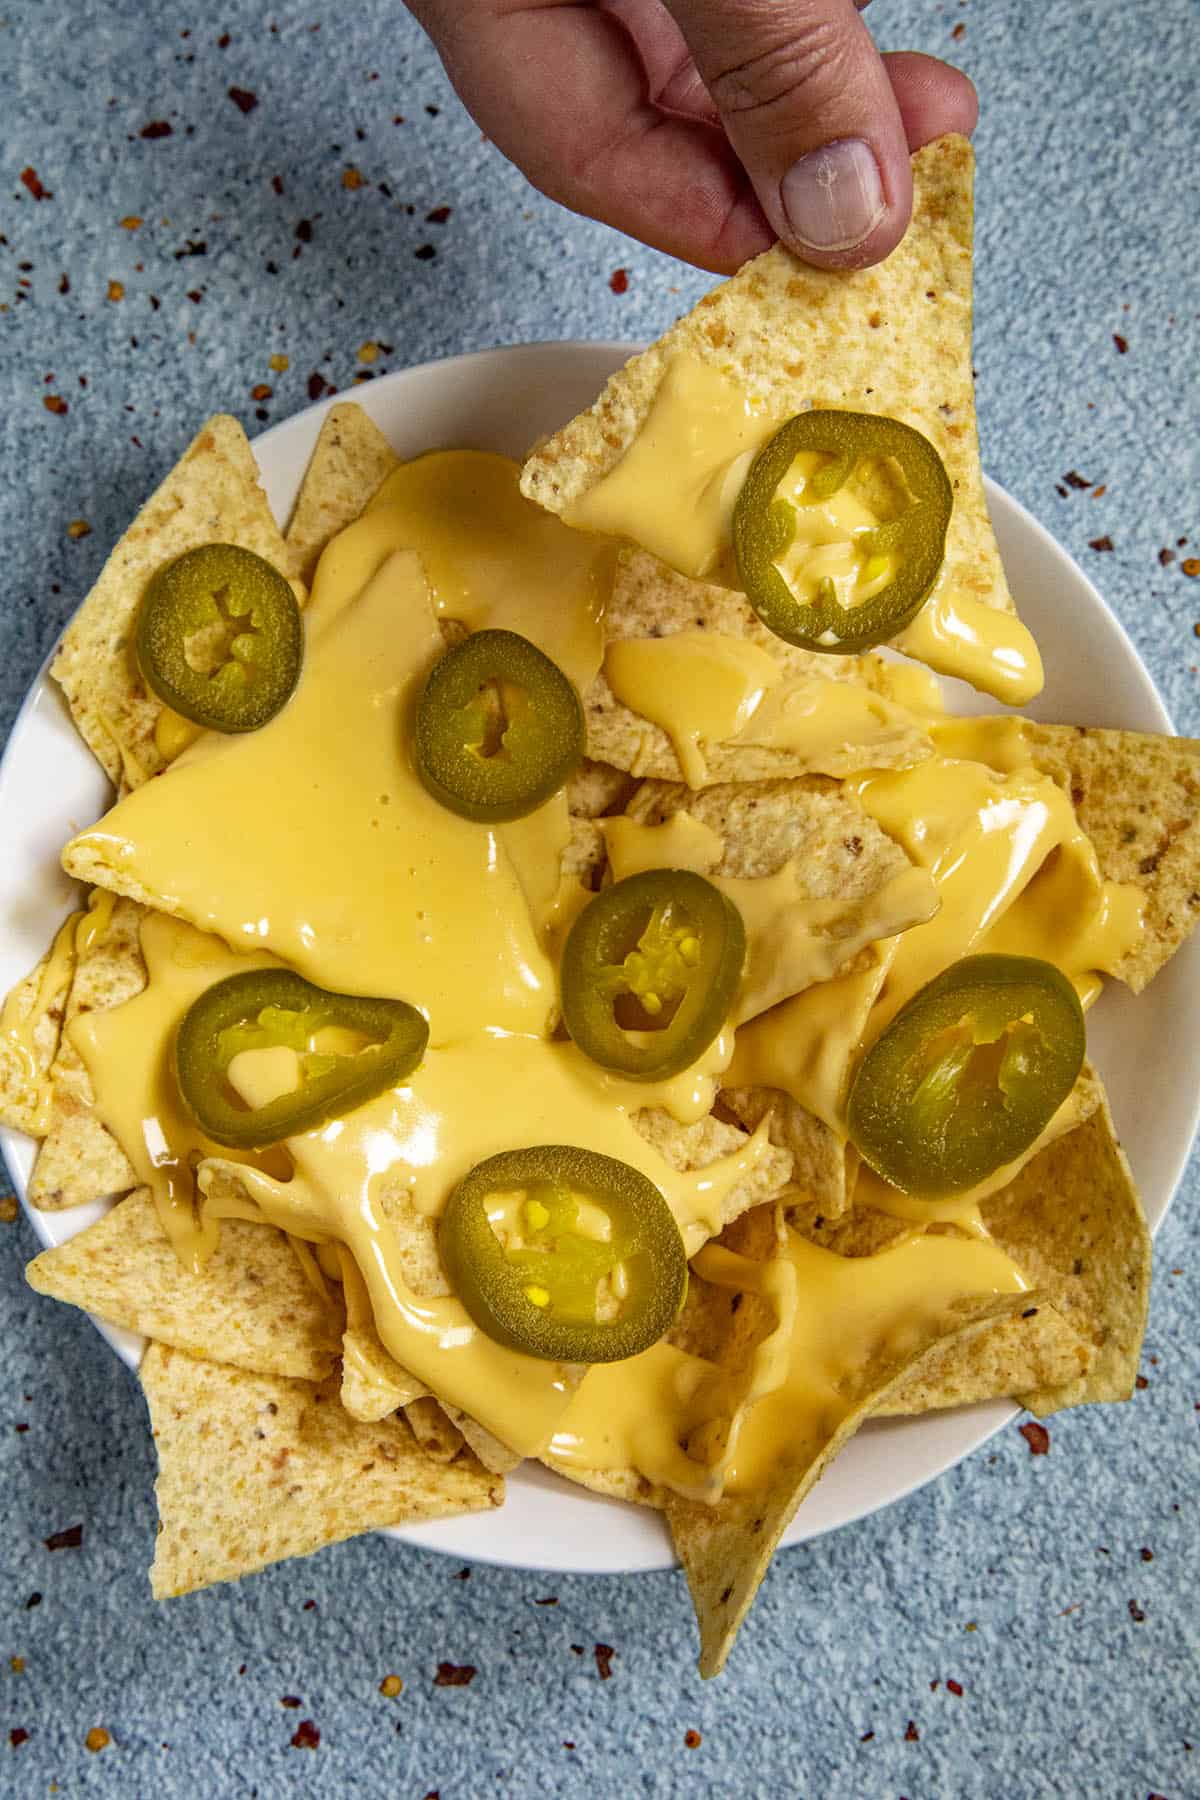 Mike taking a scoop of nachos with lots of nacho cheese sauce and pickled jalapenos